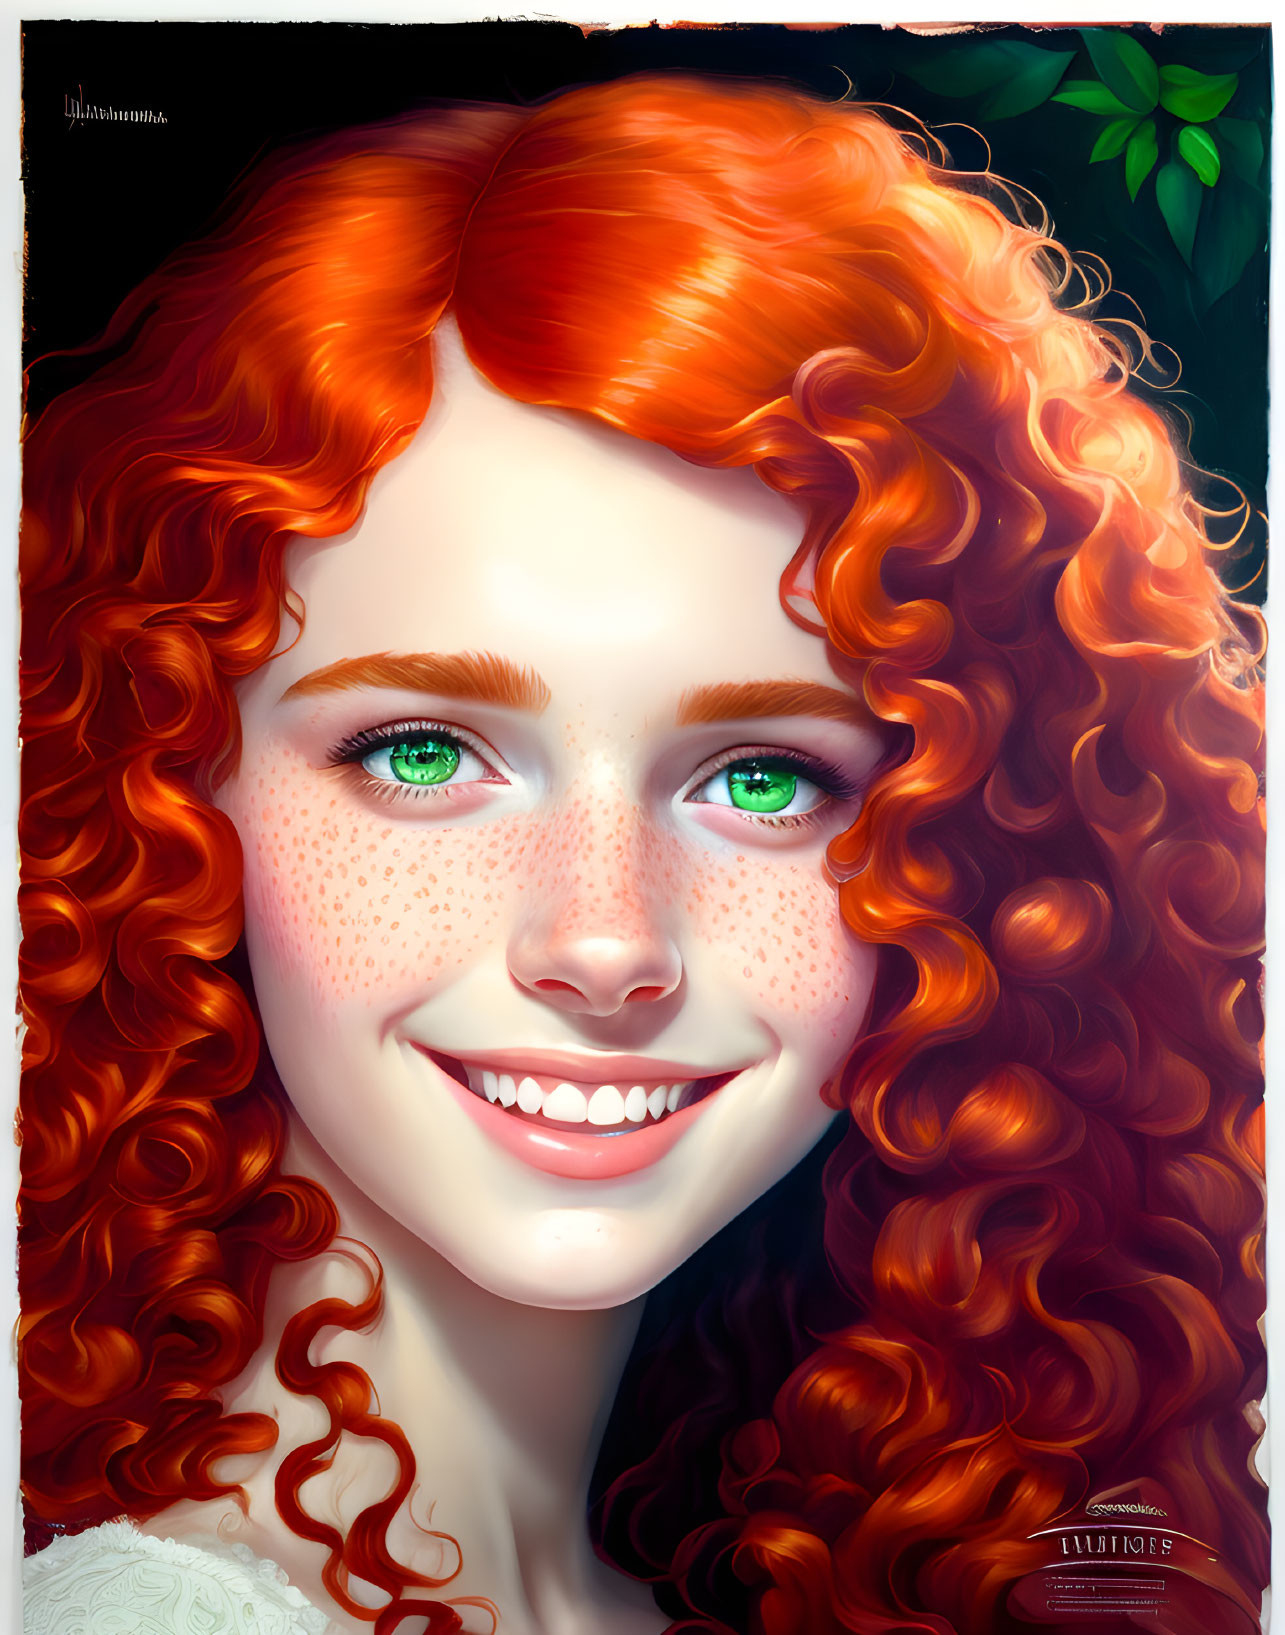 Smiling girl with red curly hair and green eyes.